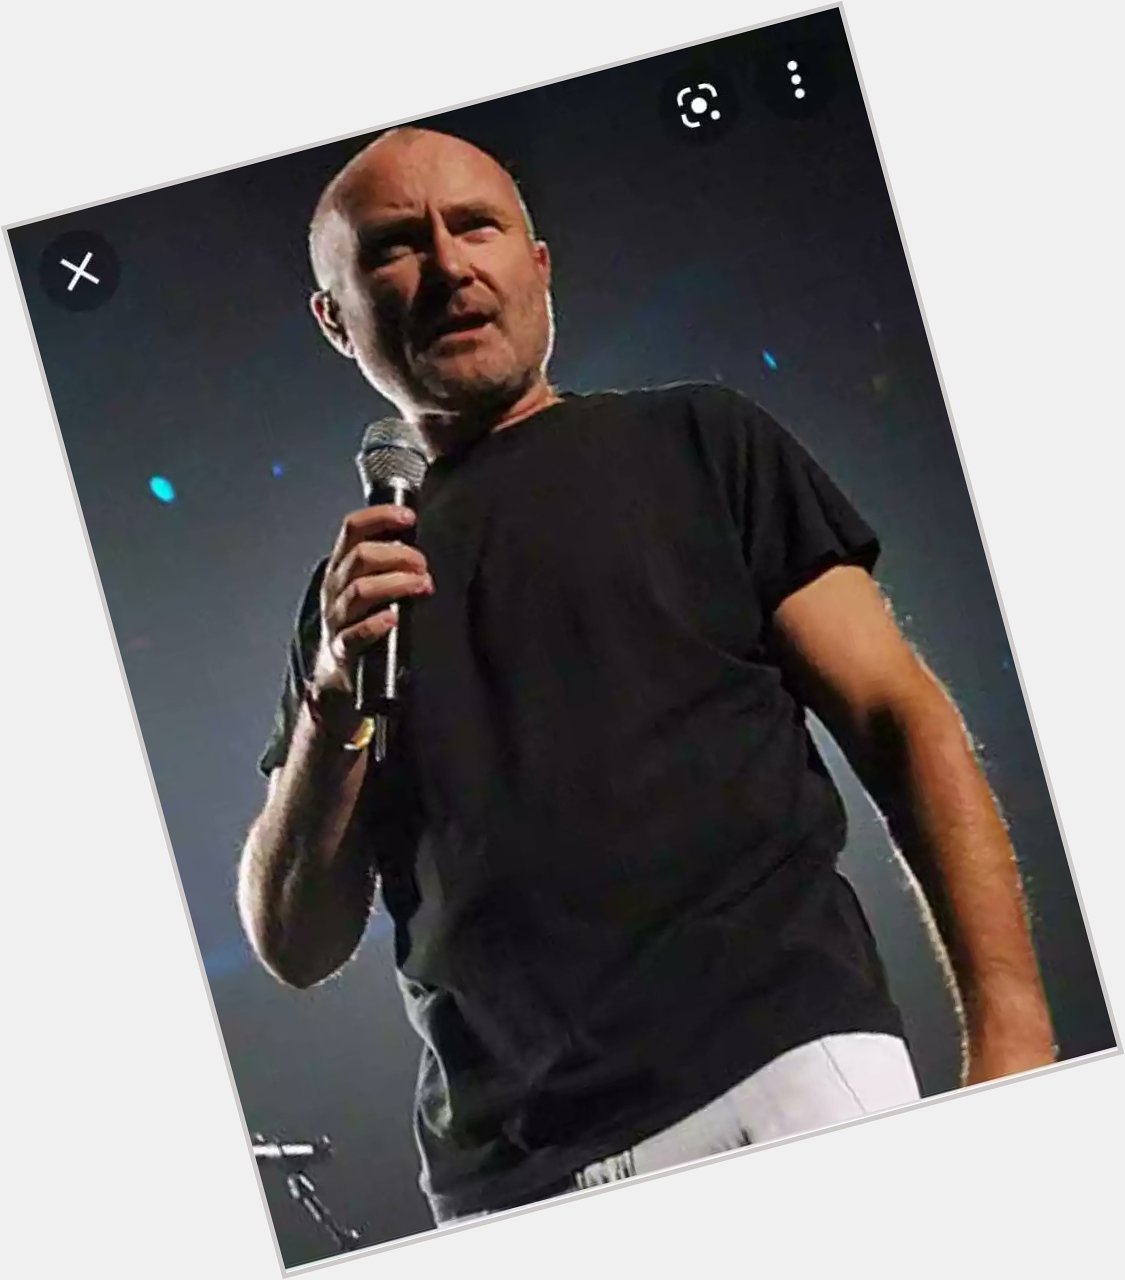 Happy birthday Phil collins,your songs was my comforter at point when i was at my lowest. 